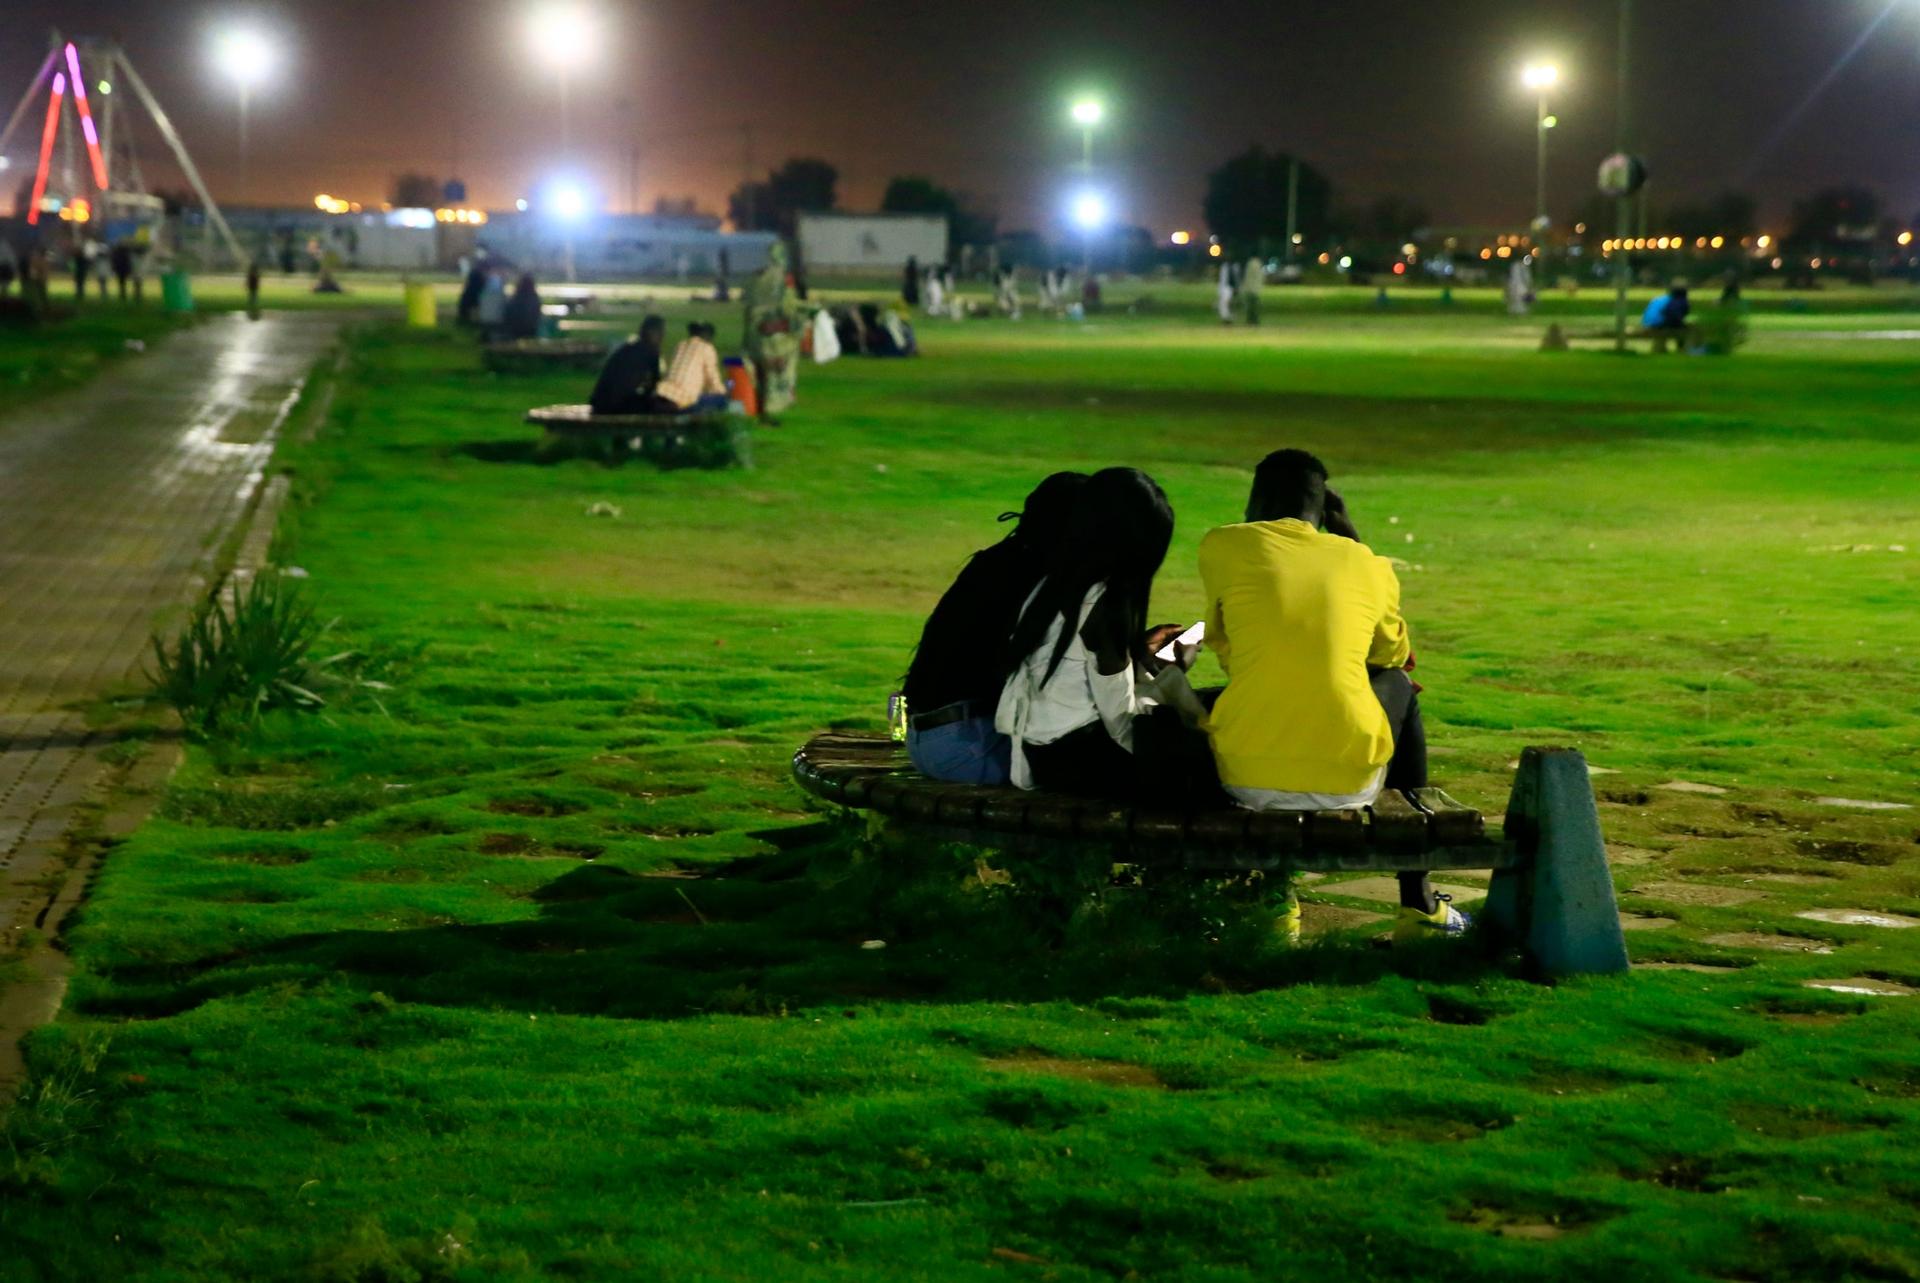 Three people are shown with one person wearing a yellow shirt while sitting on a curved metal bench amid a large grassy area.